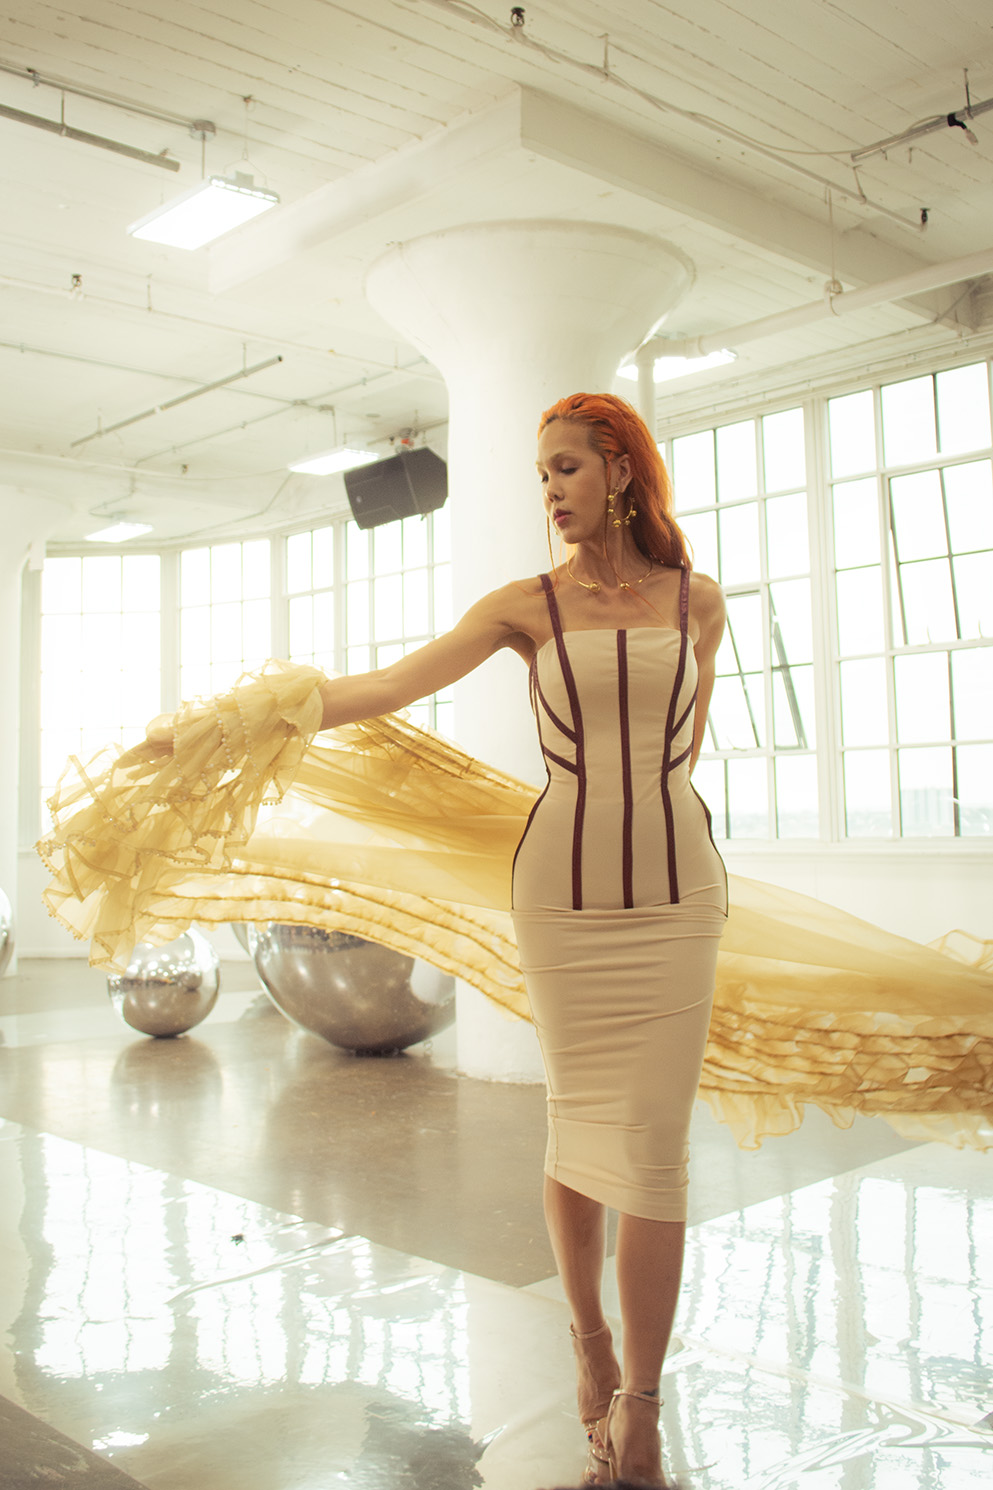 A woman spreads a yellow tulle throw behind her. She is wearing a beige dress with brown accents, and she has orange hair.